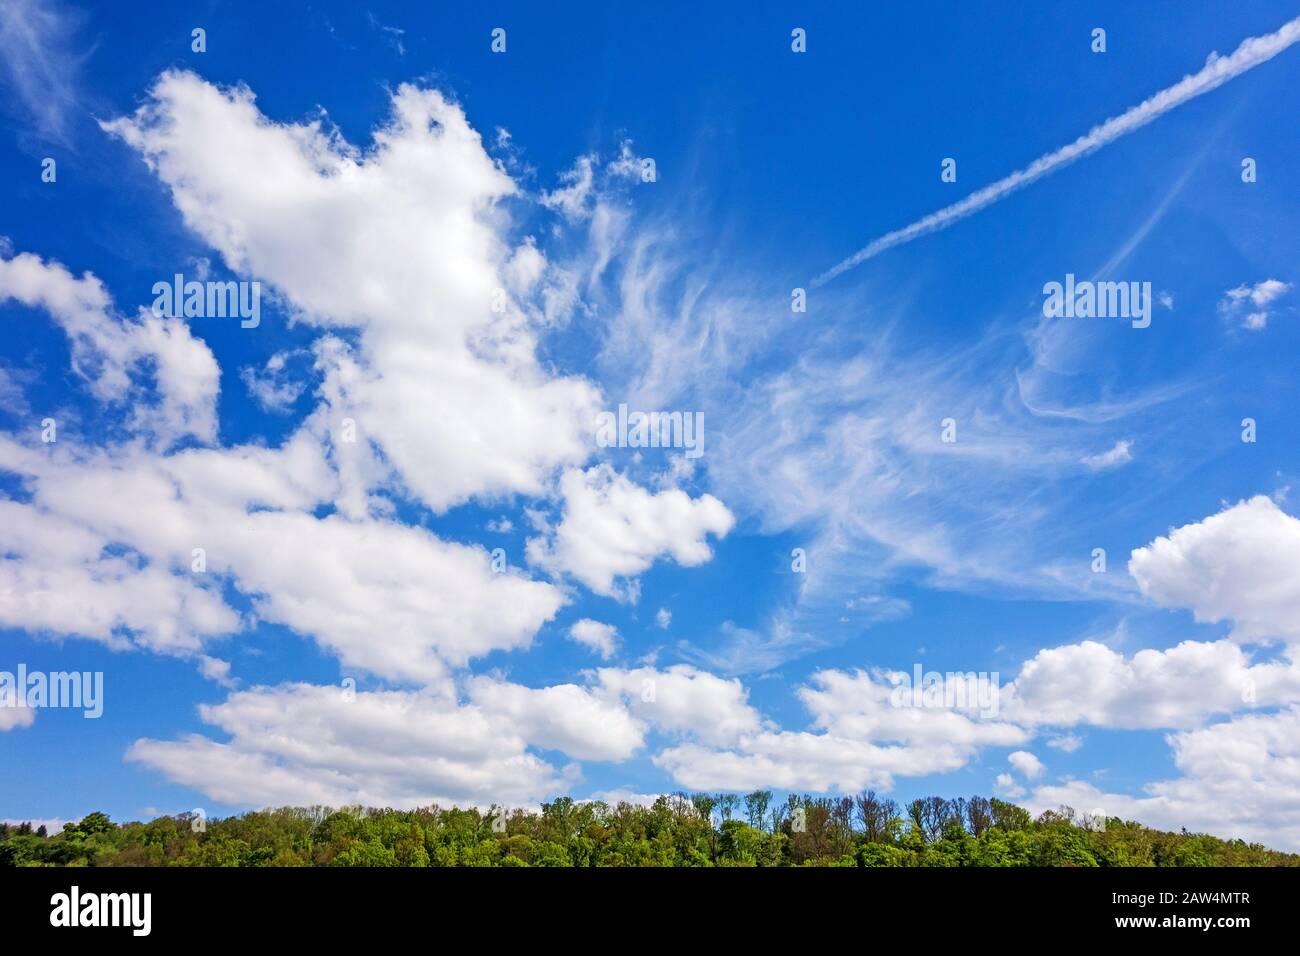 green trees with dark blue sky and white fluffy clouds Stock Photo